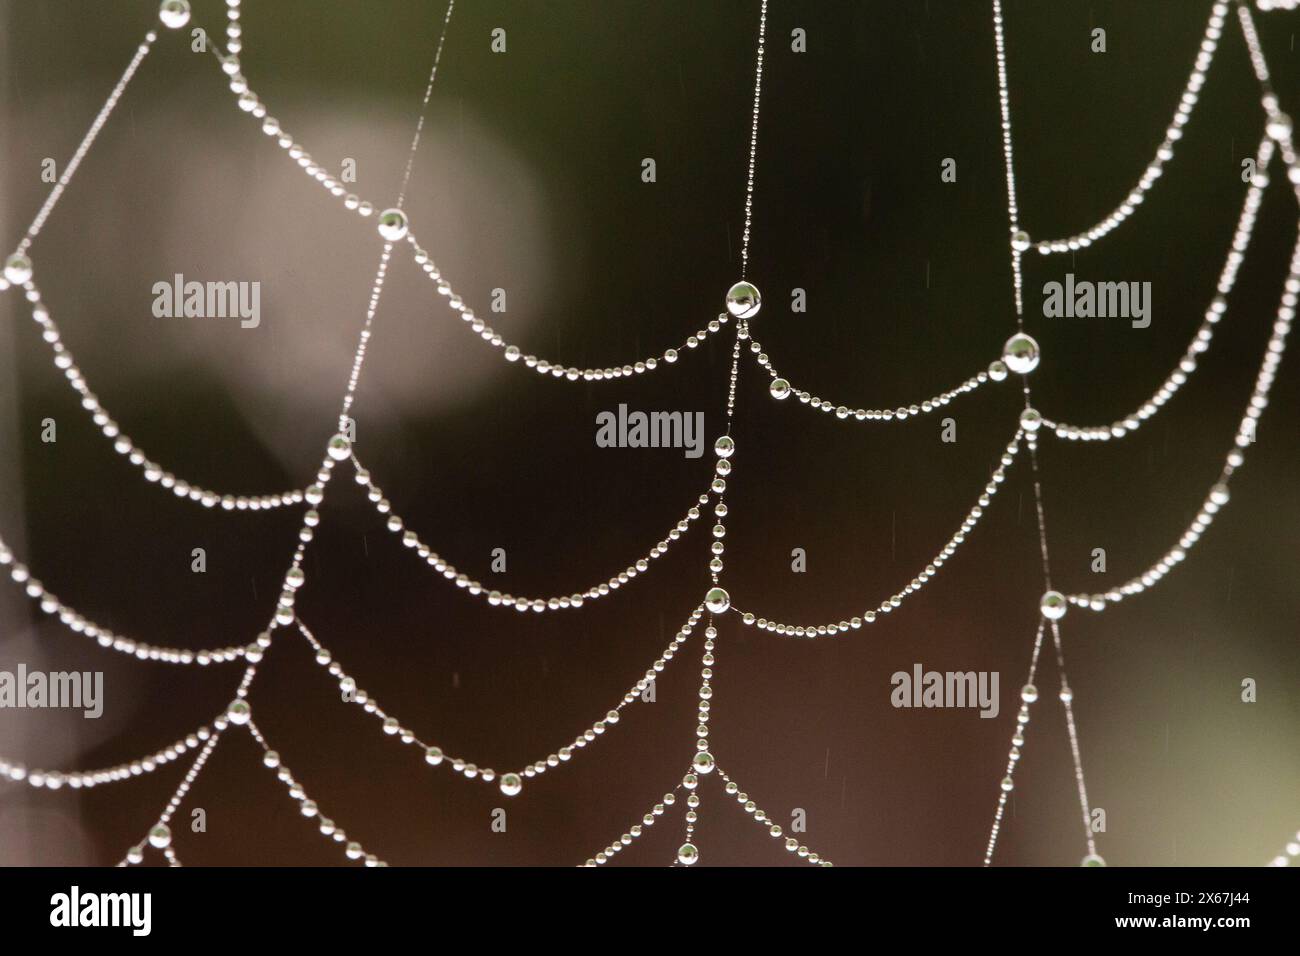 Close-up of drops in a spider's web against a dark background Stock Photo